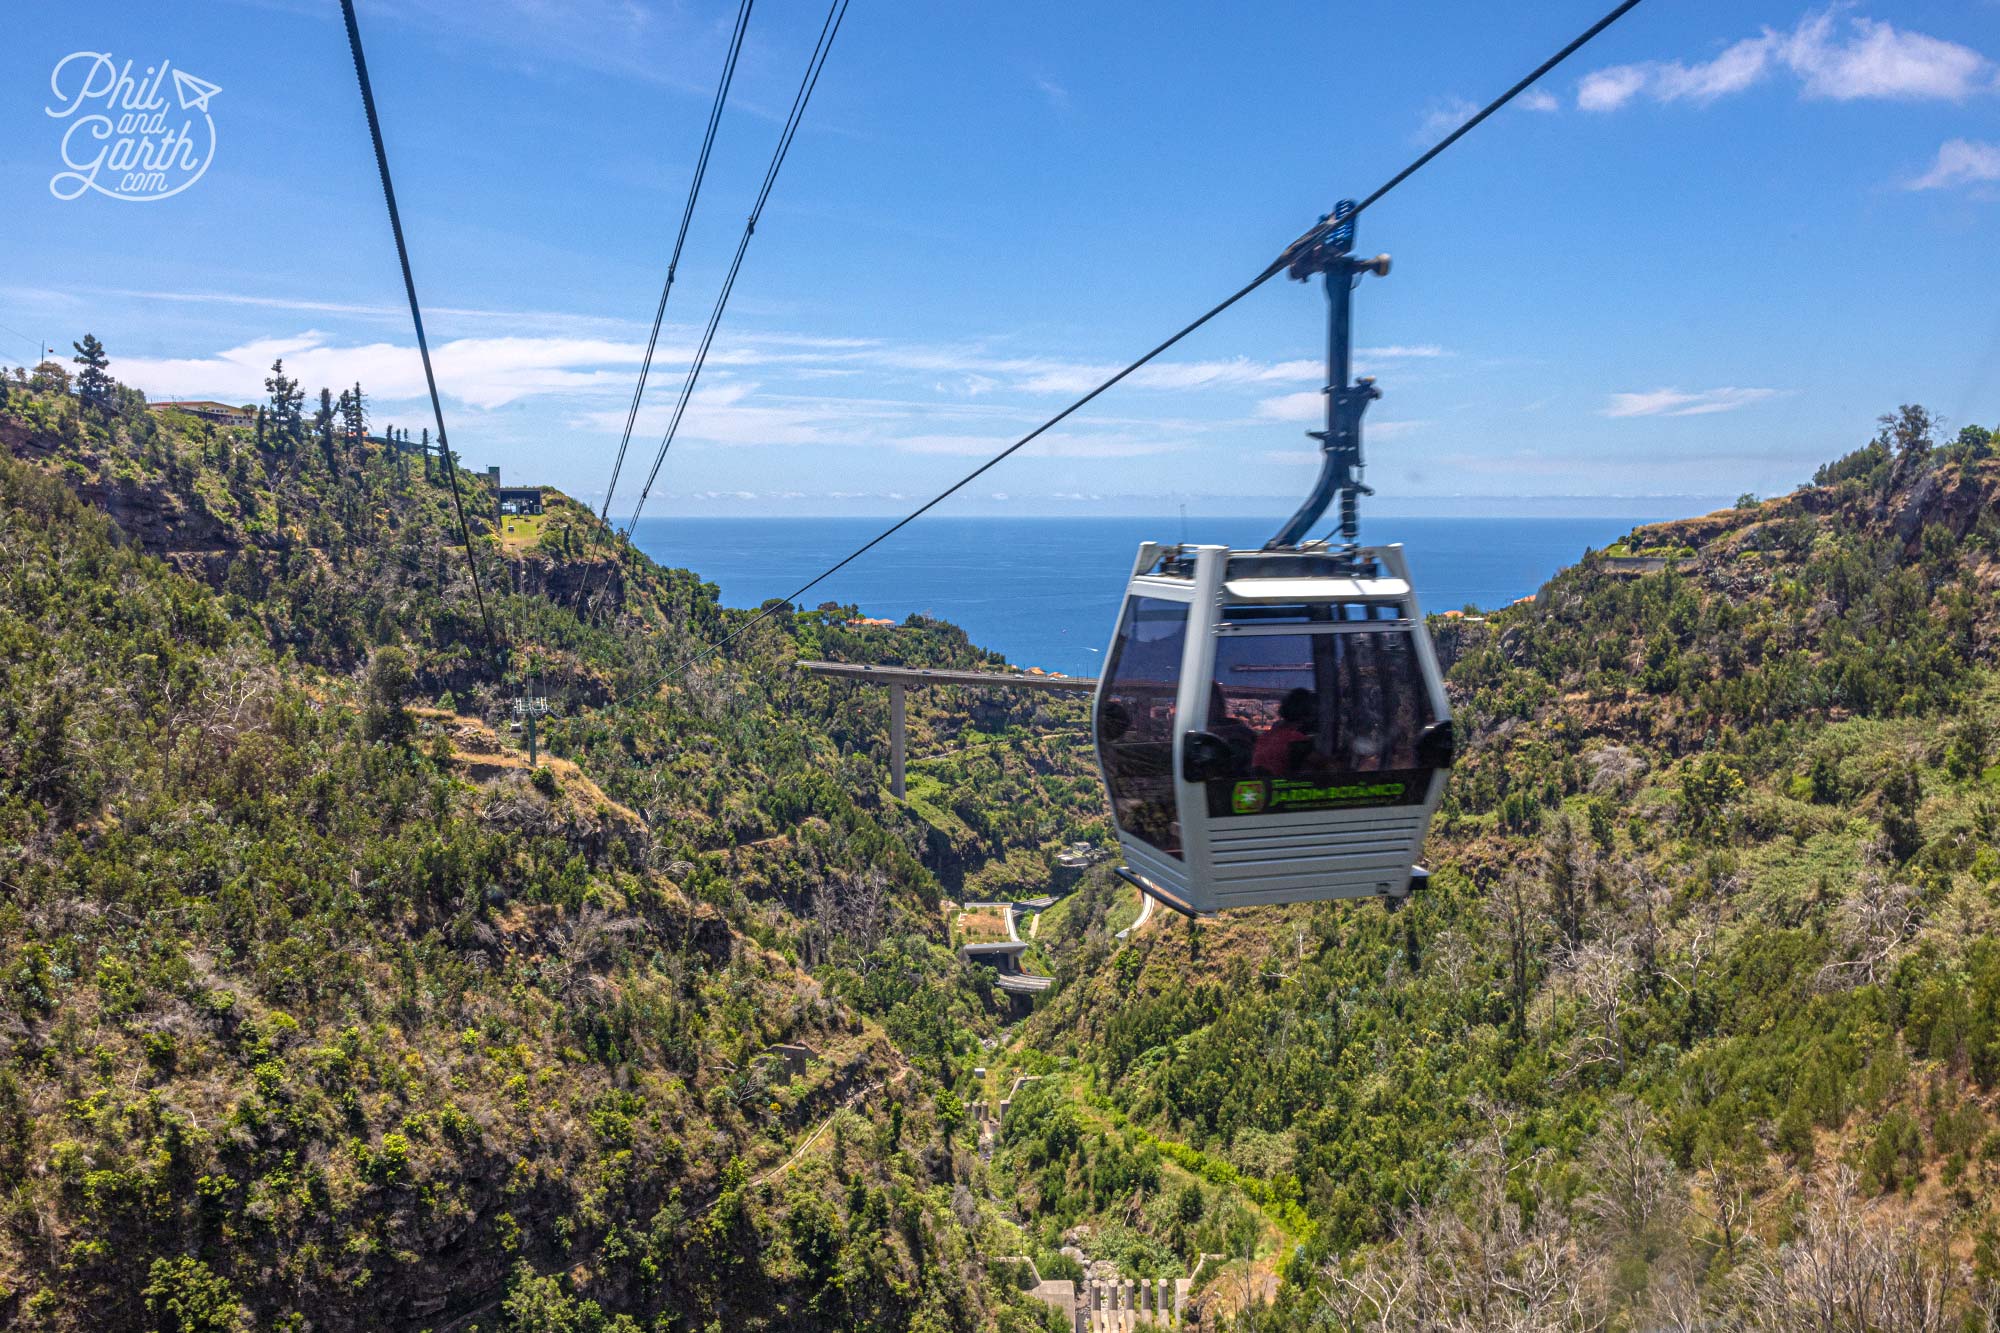 You need to take a second cable car from Monte to reach the Botanic Garden Maderia